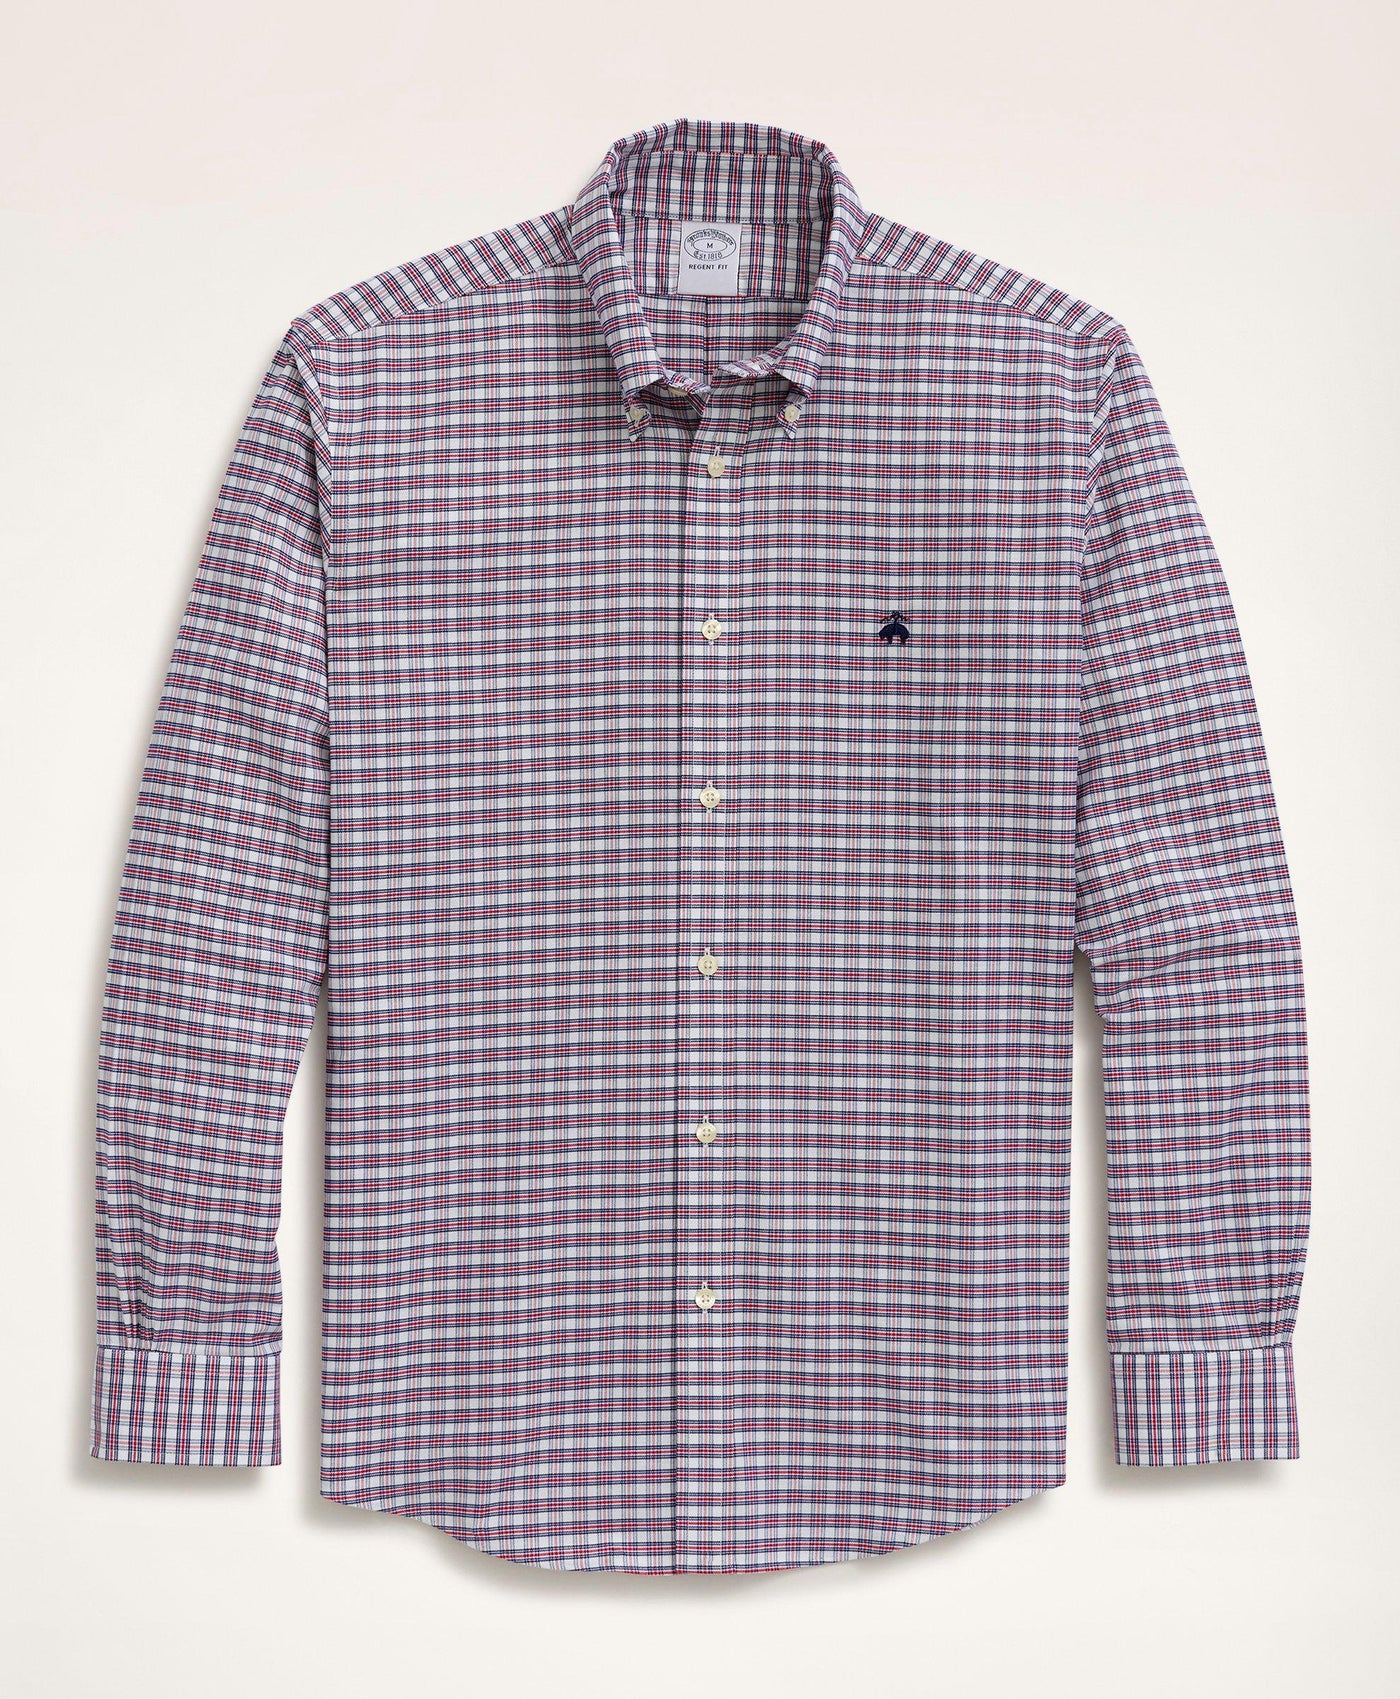 Stretch Regent Regular-Fit Sport Shirt, Non-Iron Mini-Check Oxford Button Down Collar - Brooks Brothers Canada